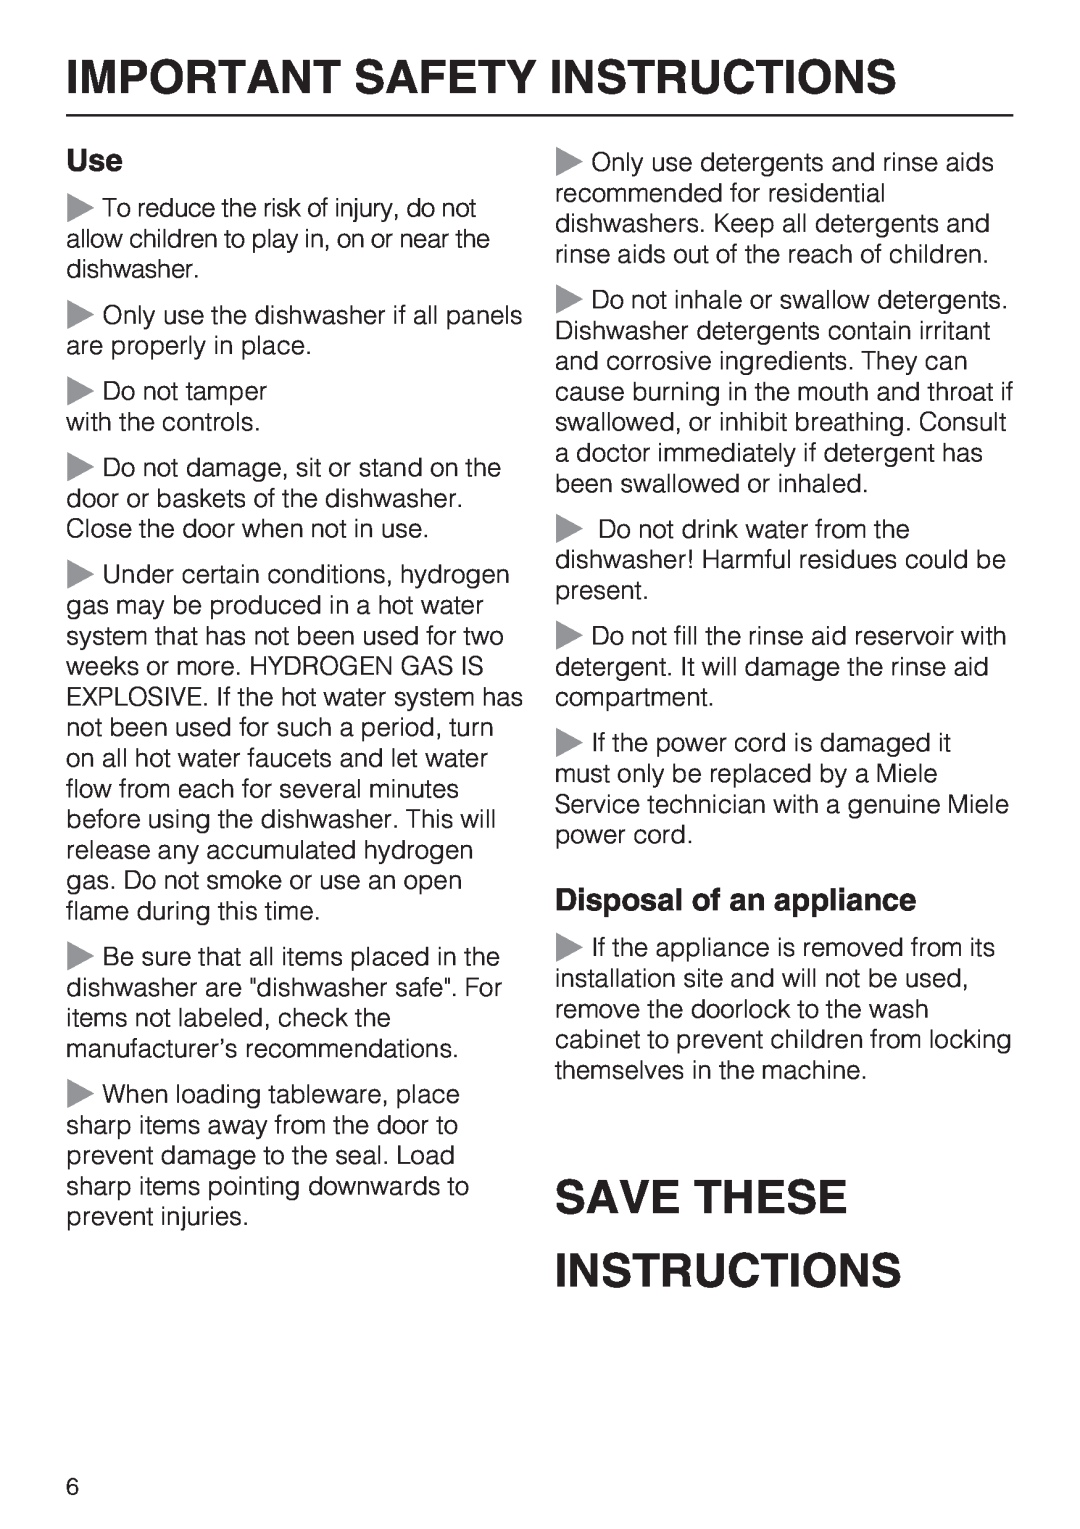 Miele G 2170, G 2180, G 1180 manual Save These Instructions, Disposal of an appliance, Important Safety Instructions 